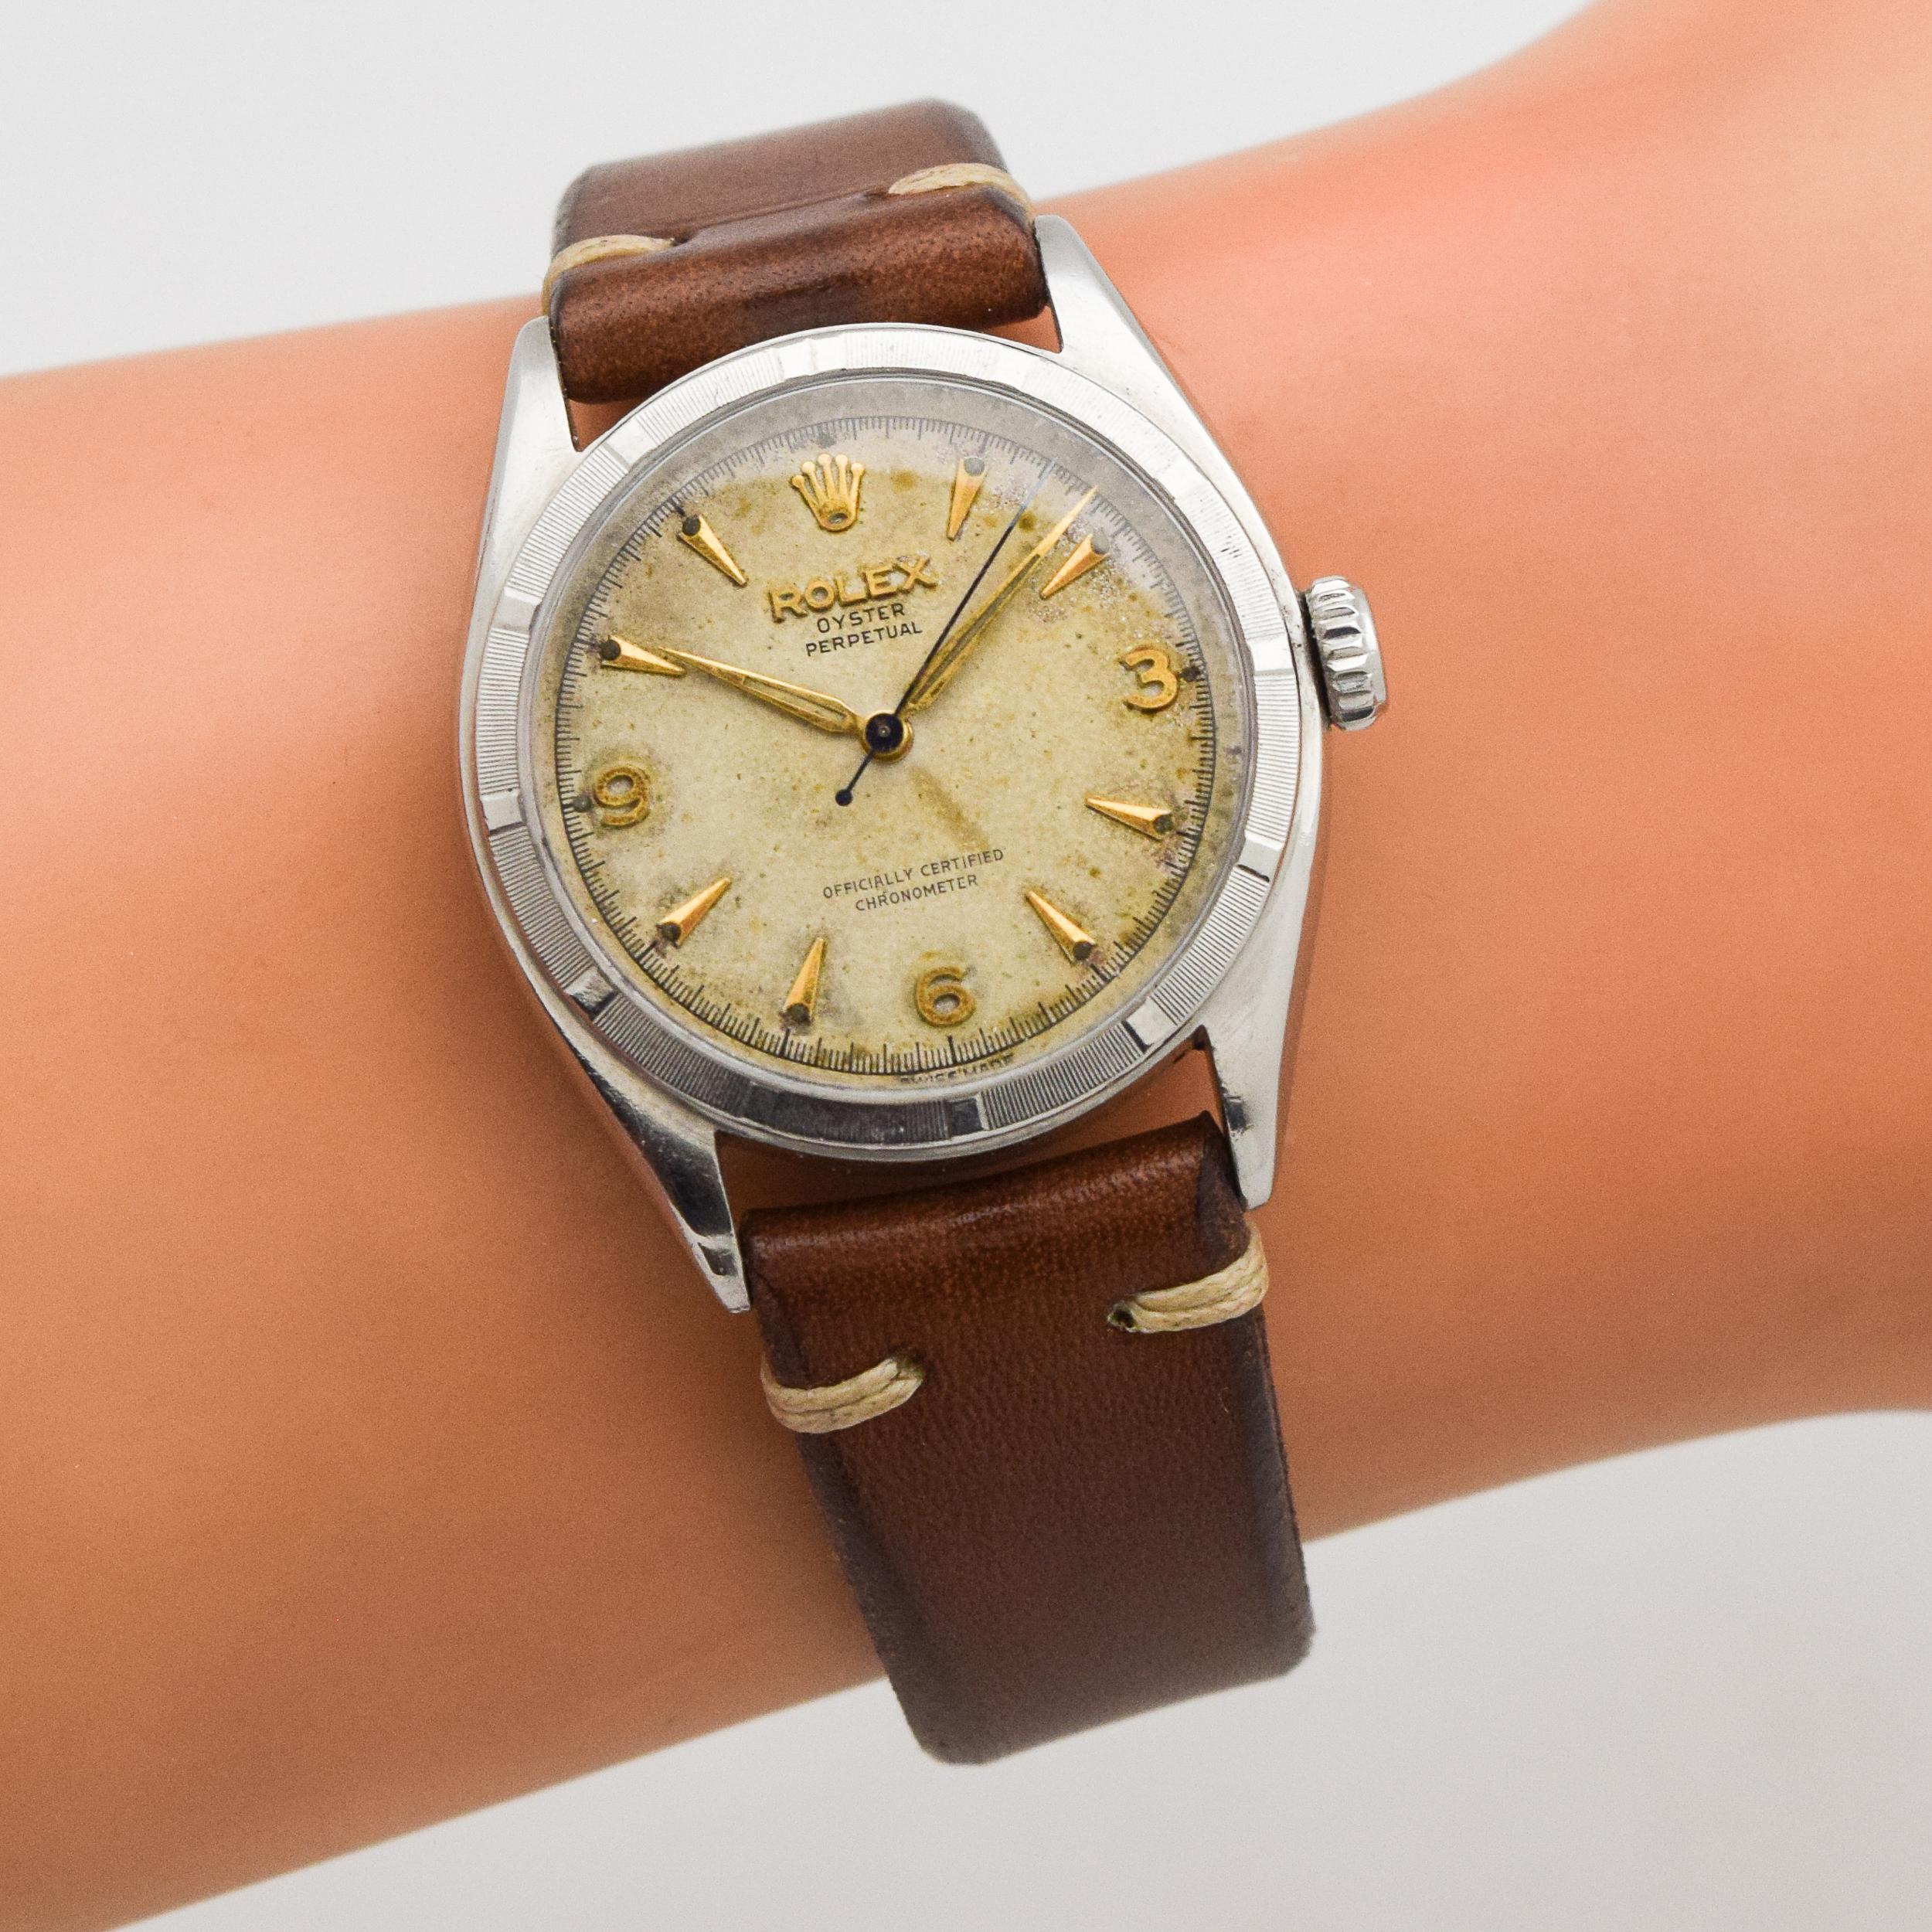 Vintage Rolex Oyster Perpetual Reference 6085 Stainless Steel Watch, 1958 For Sale 1